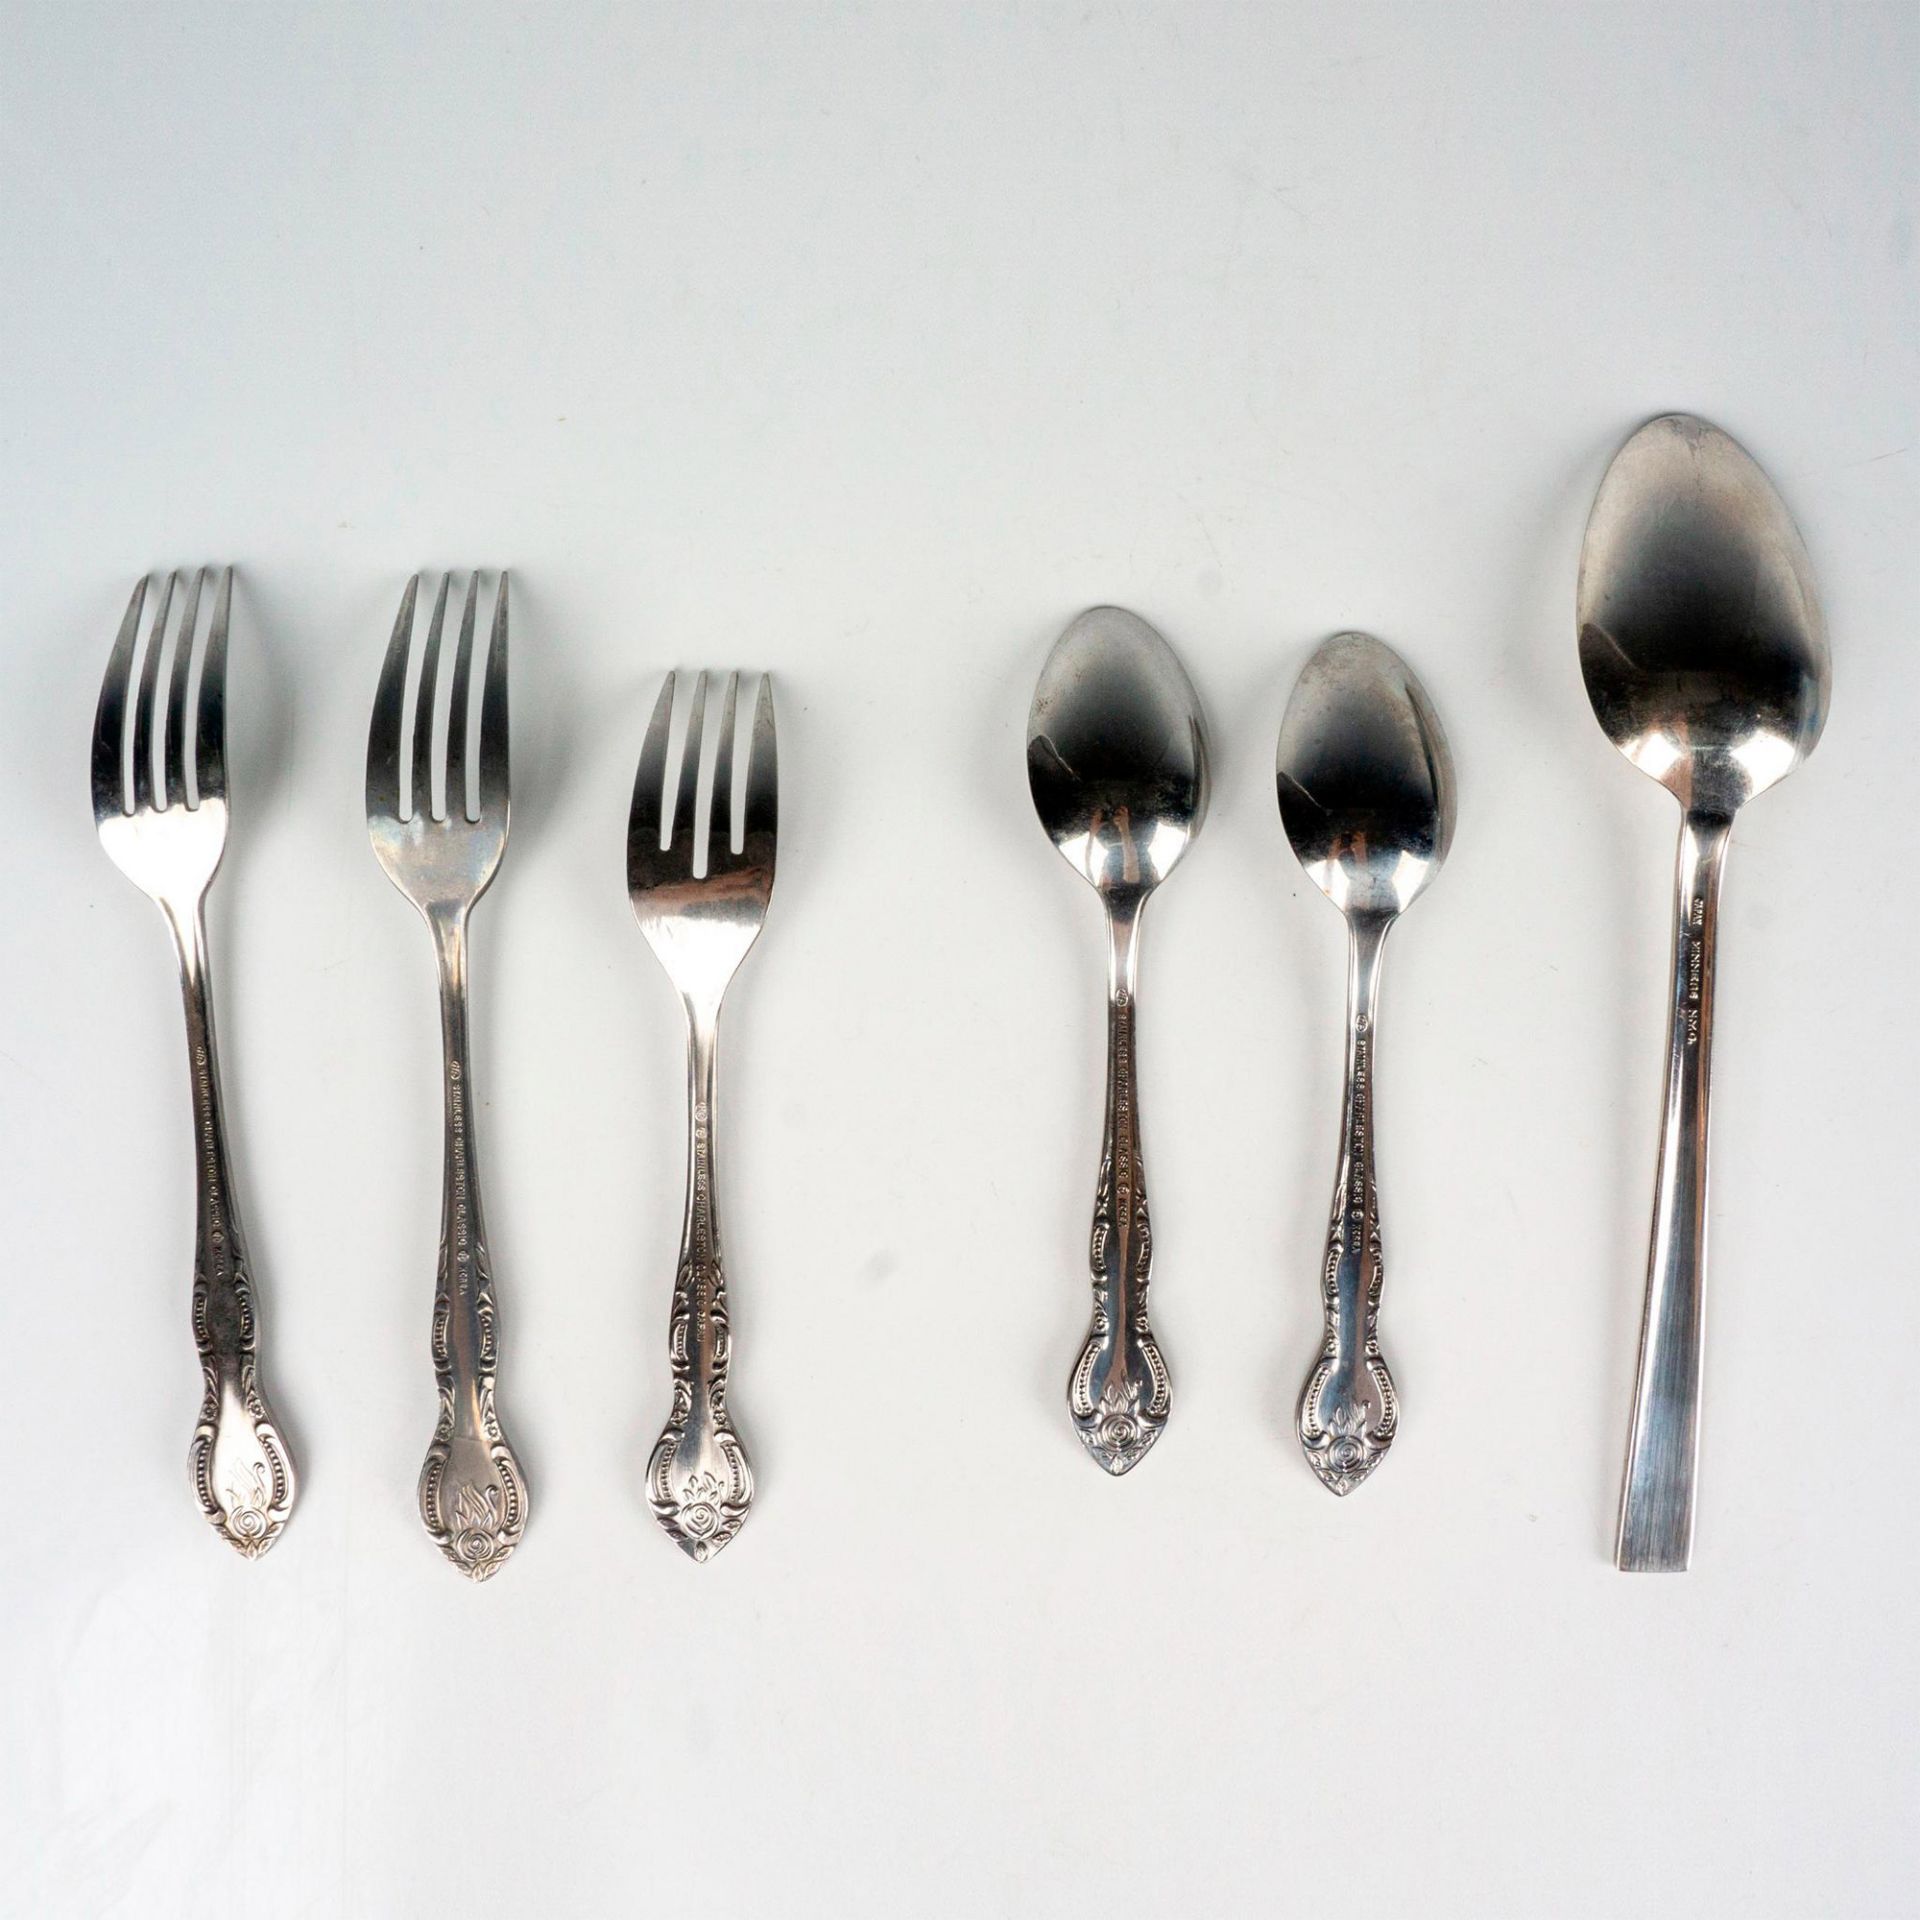 6pc Stainless Steel Flatware - Image 2 of 2